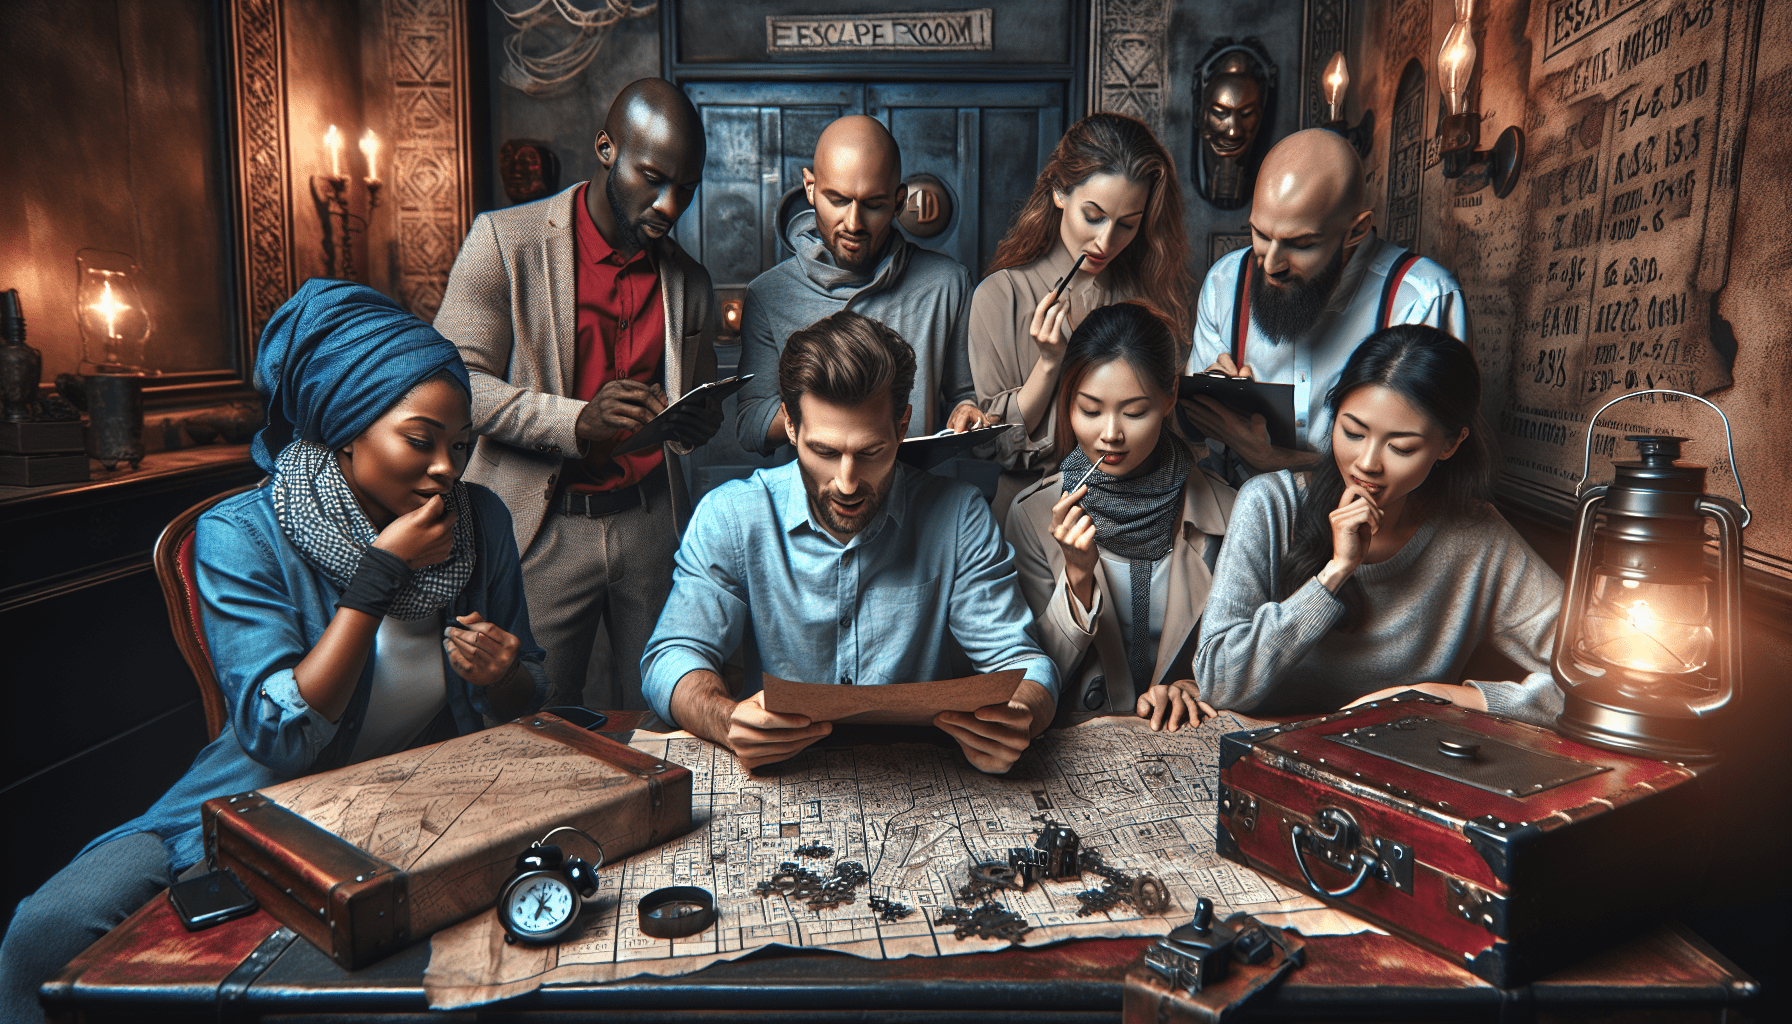 How Big Of A Group For Escape Rooms?